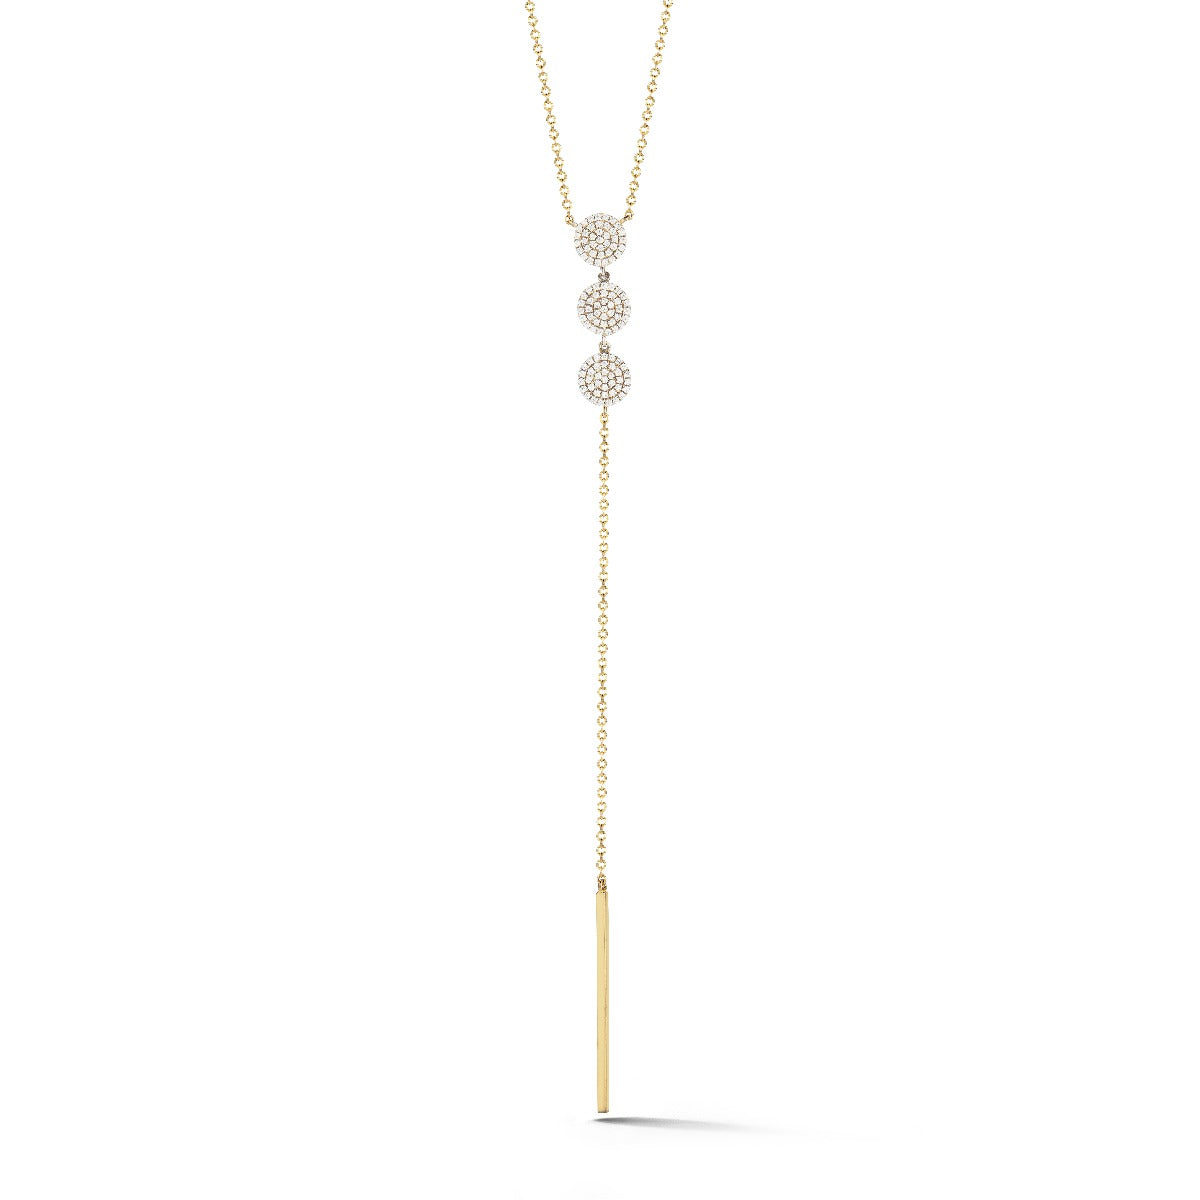 FASHIONABLE LARIAT NECKLACE IN 14K WITH 114 DIAMONDS T.W 0.38CT ON 18 INCHES CHAIN